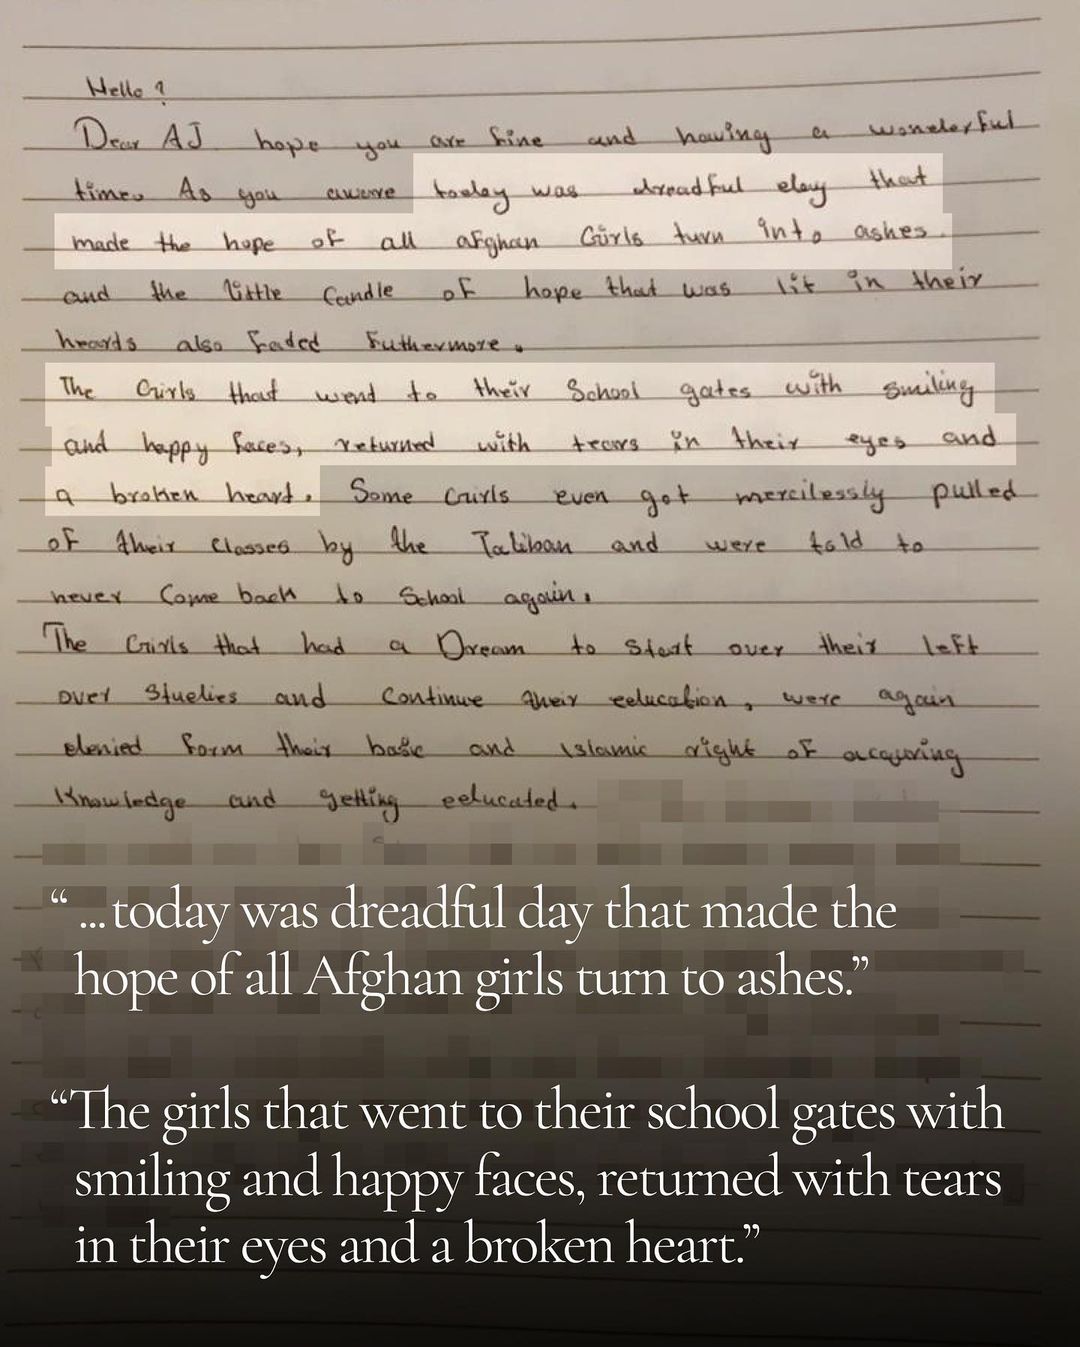 I received this letter from an Afghan girl, one of millions affected by the Taliban’s closure of girls’ high schools in Afghanistan - on the first day of the school year. Millions of Afghan girls who have already missed 8 months of education don’t know if and when they will ever set foot in a classroom again. I share it in the hope that you will continue to join me in listening to voices like hers, and continue to support and fight for women’s education and rights in Afghanistan.

#afghanwomen 
#afghanistan 
#letafghangirlslearn